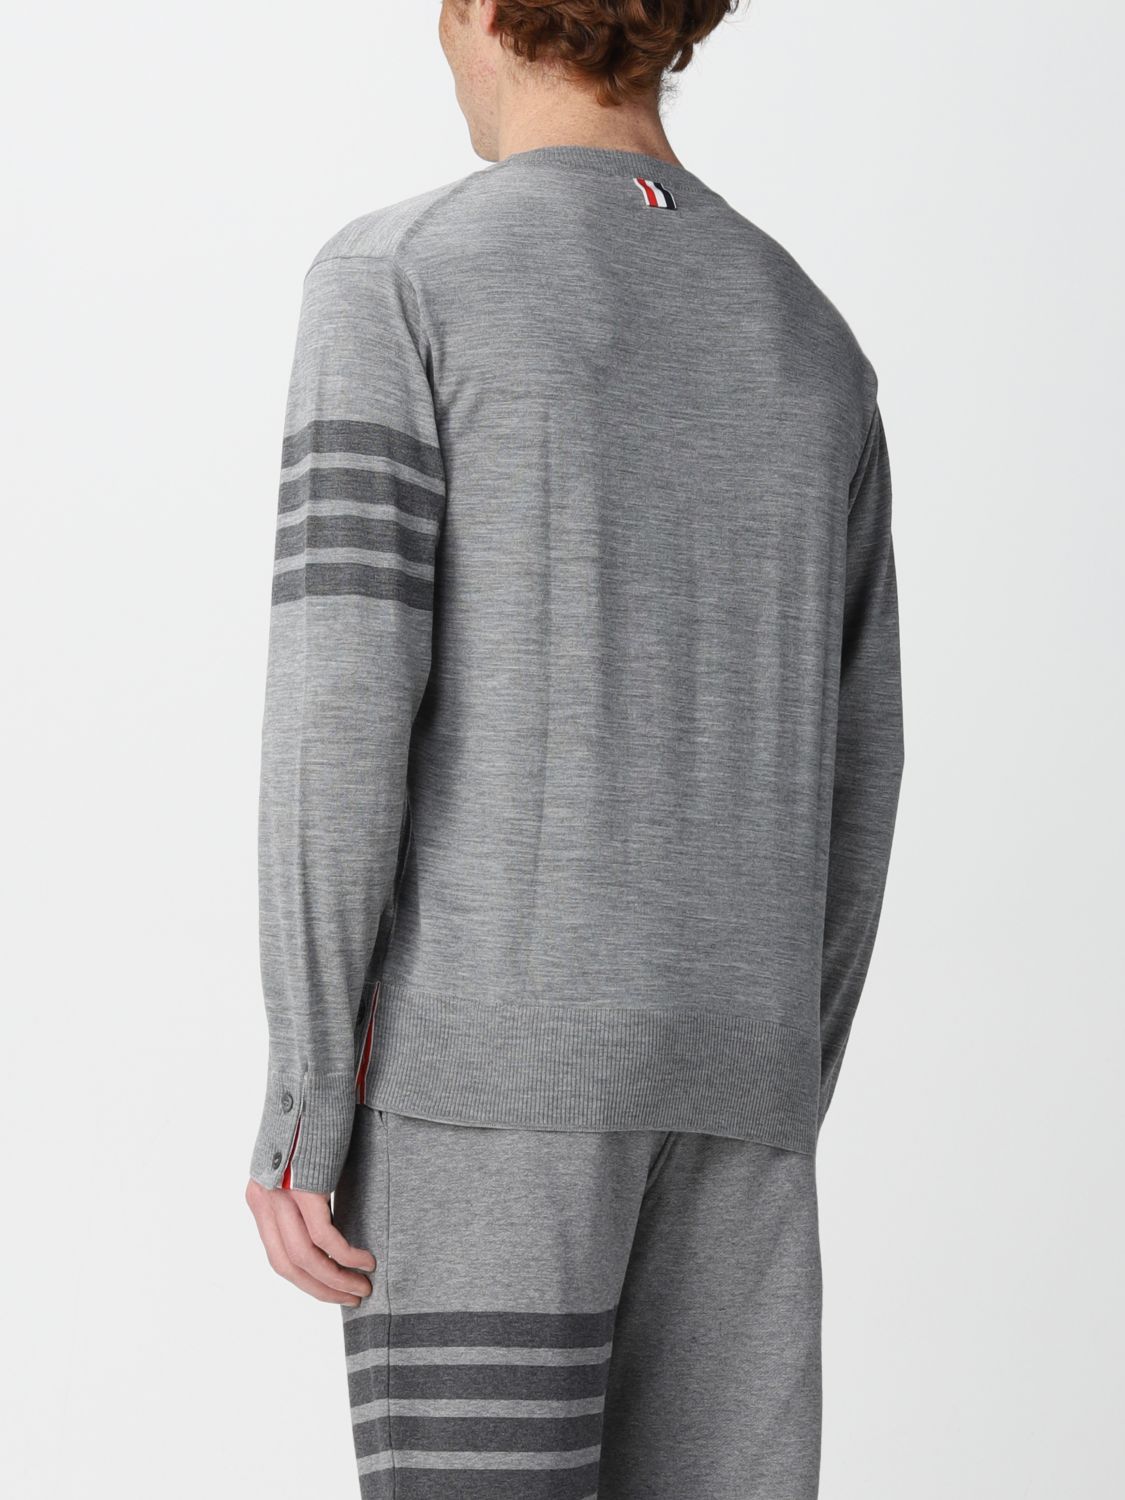 Jersey Thom Browne: Jersey Thom Browne para hombre gris 3